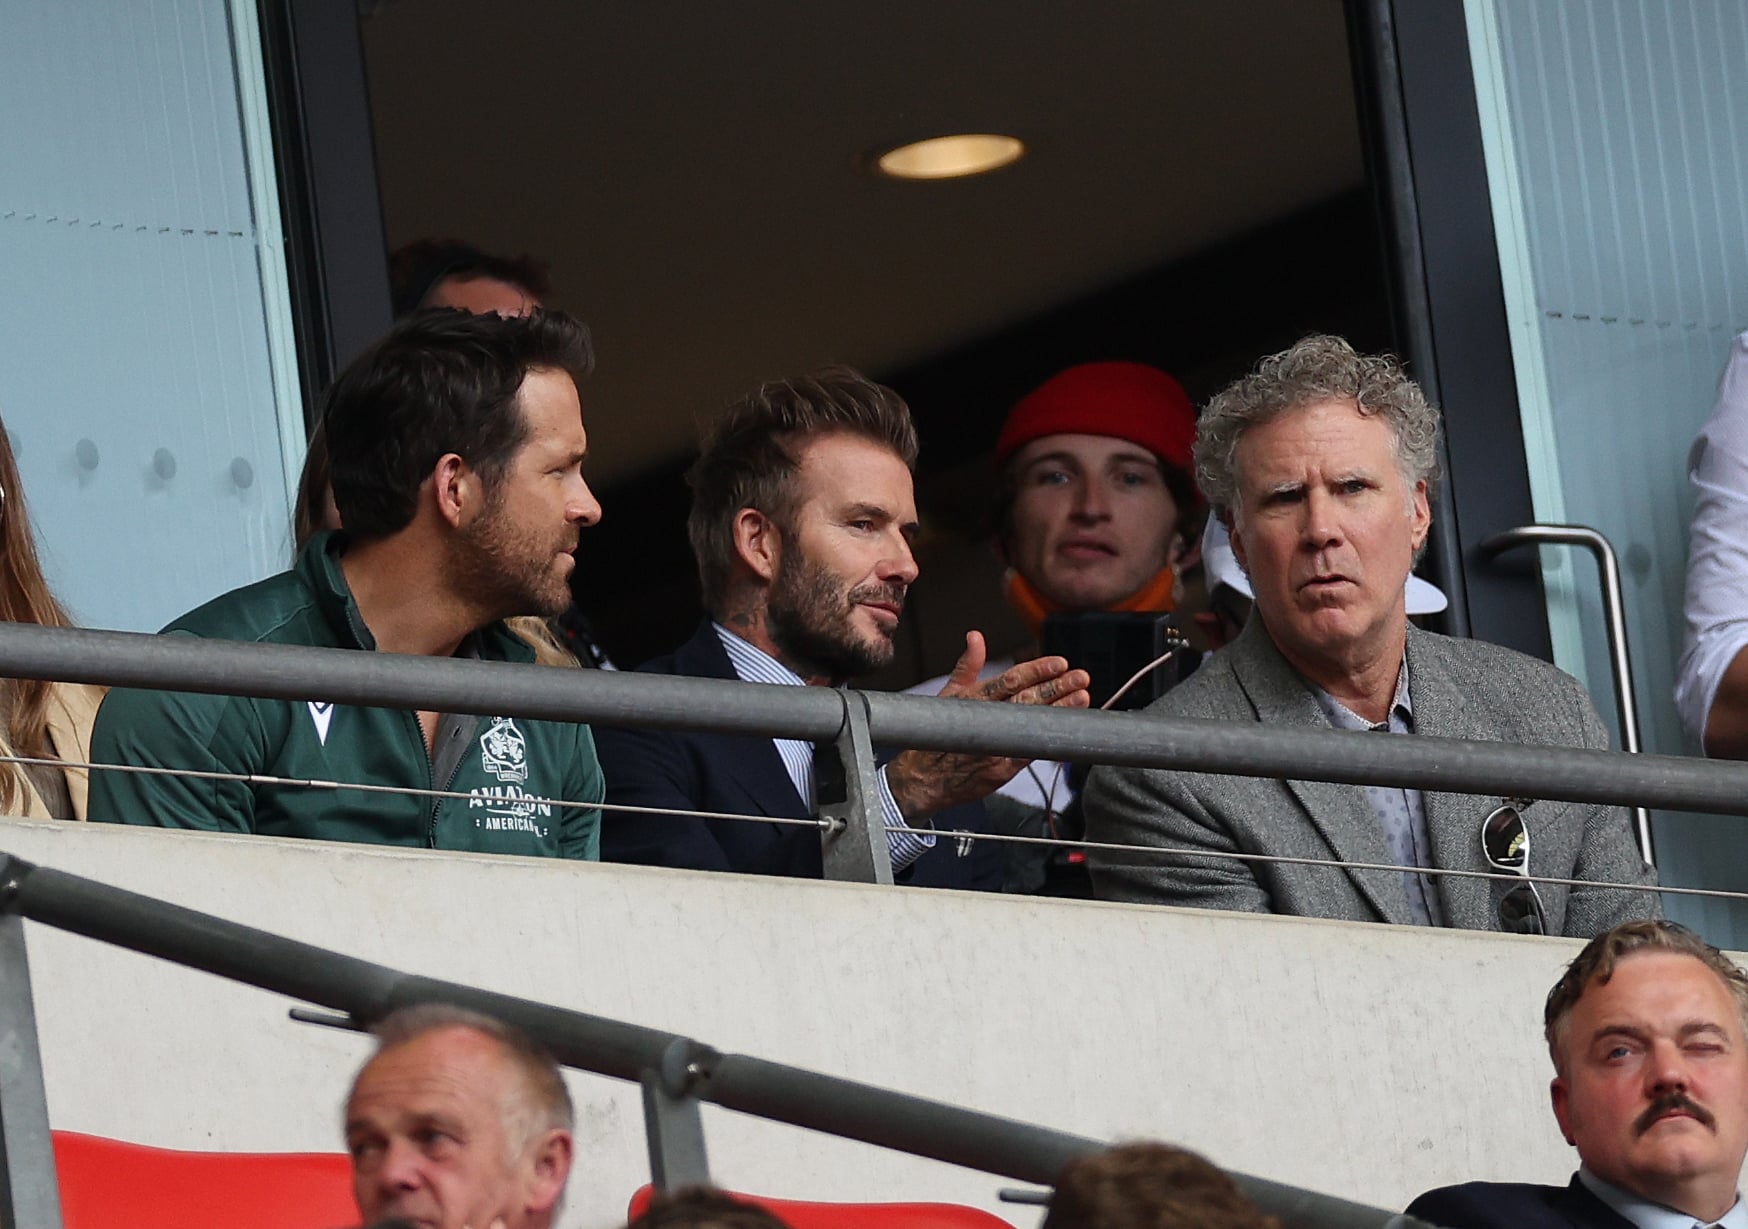 LONDON, ENGLAND - MAY 22: (L-R), Wrexham Owner & Hollywood actor Ryan Reynolds, Ex England Footballer David Beckham and Hollywood actor Will Ferrell in the tribune during the Buildbase FA Trophy Final between Bromley and Wrexham at Wembley Stadium on May 22, 2022 in London, England. (Photo by Eddie Keogh - The FA/The FA via Getty Images)